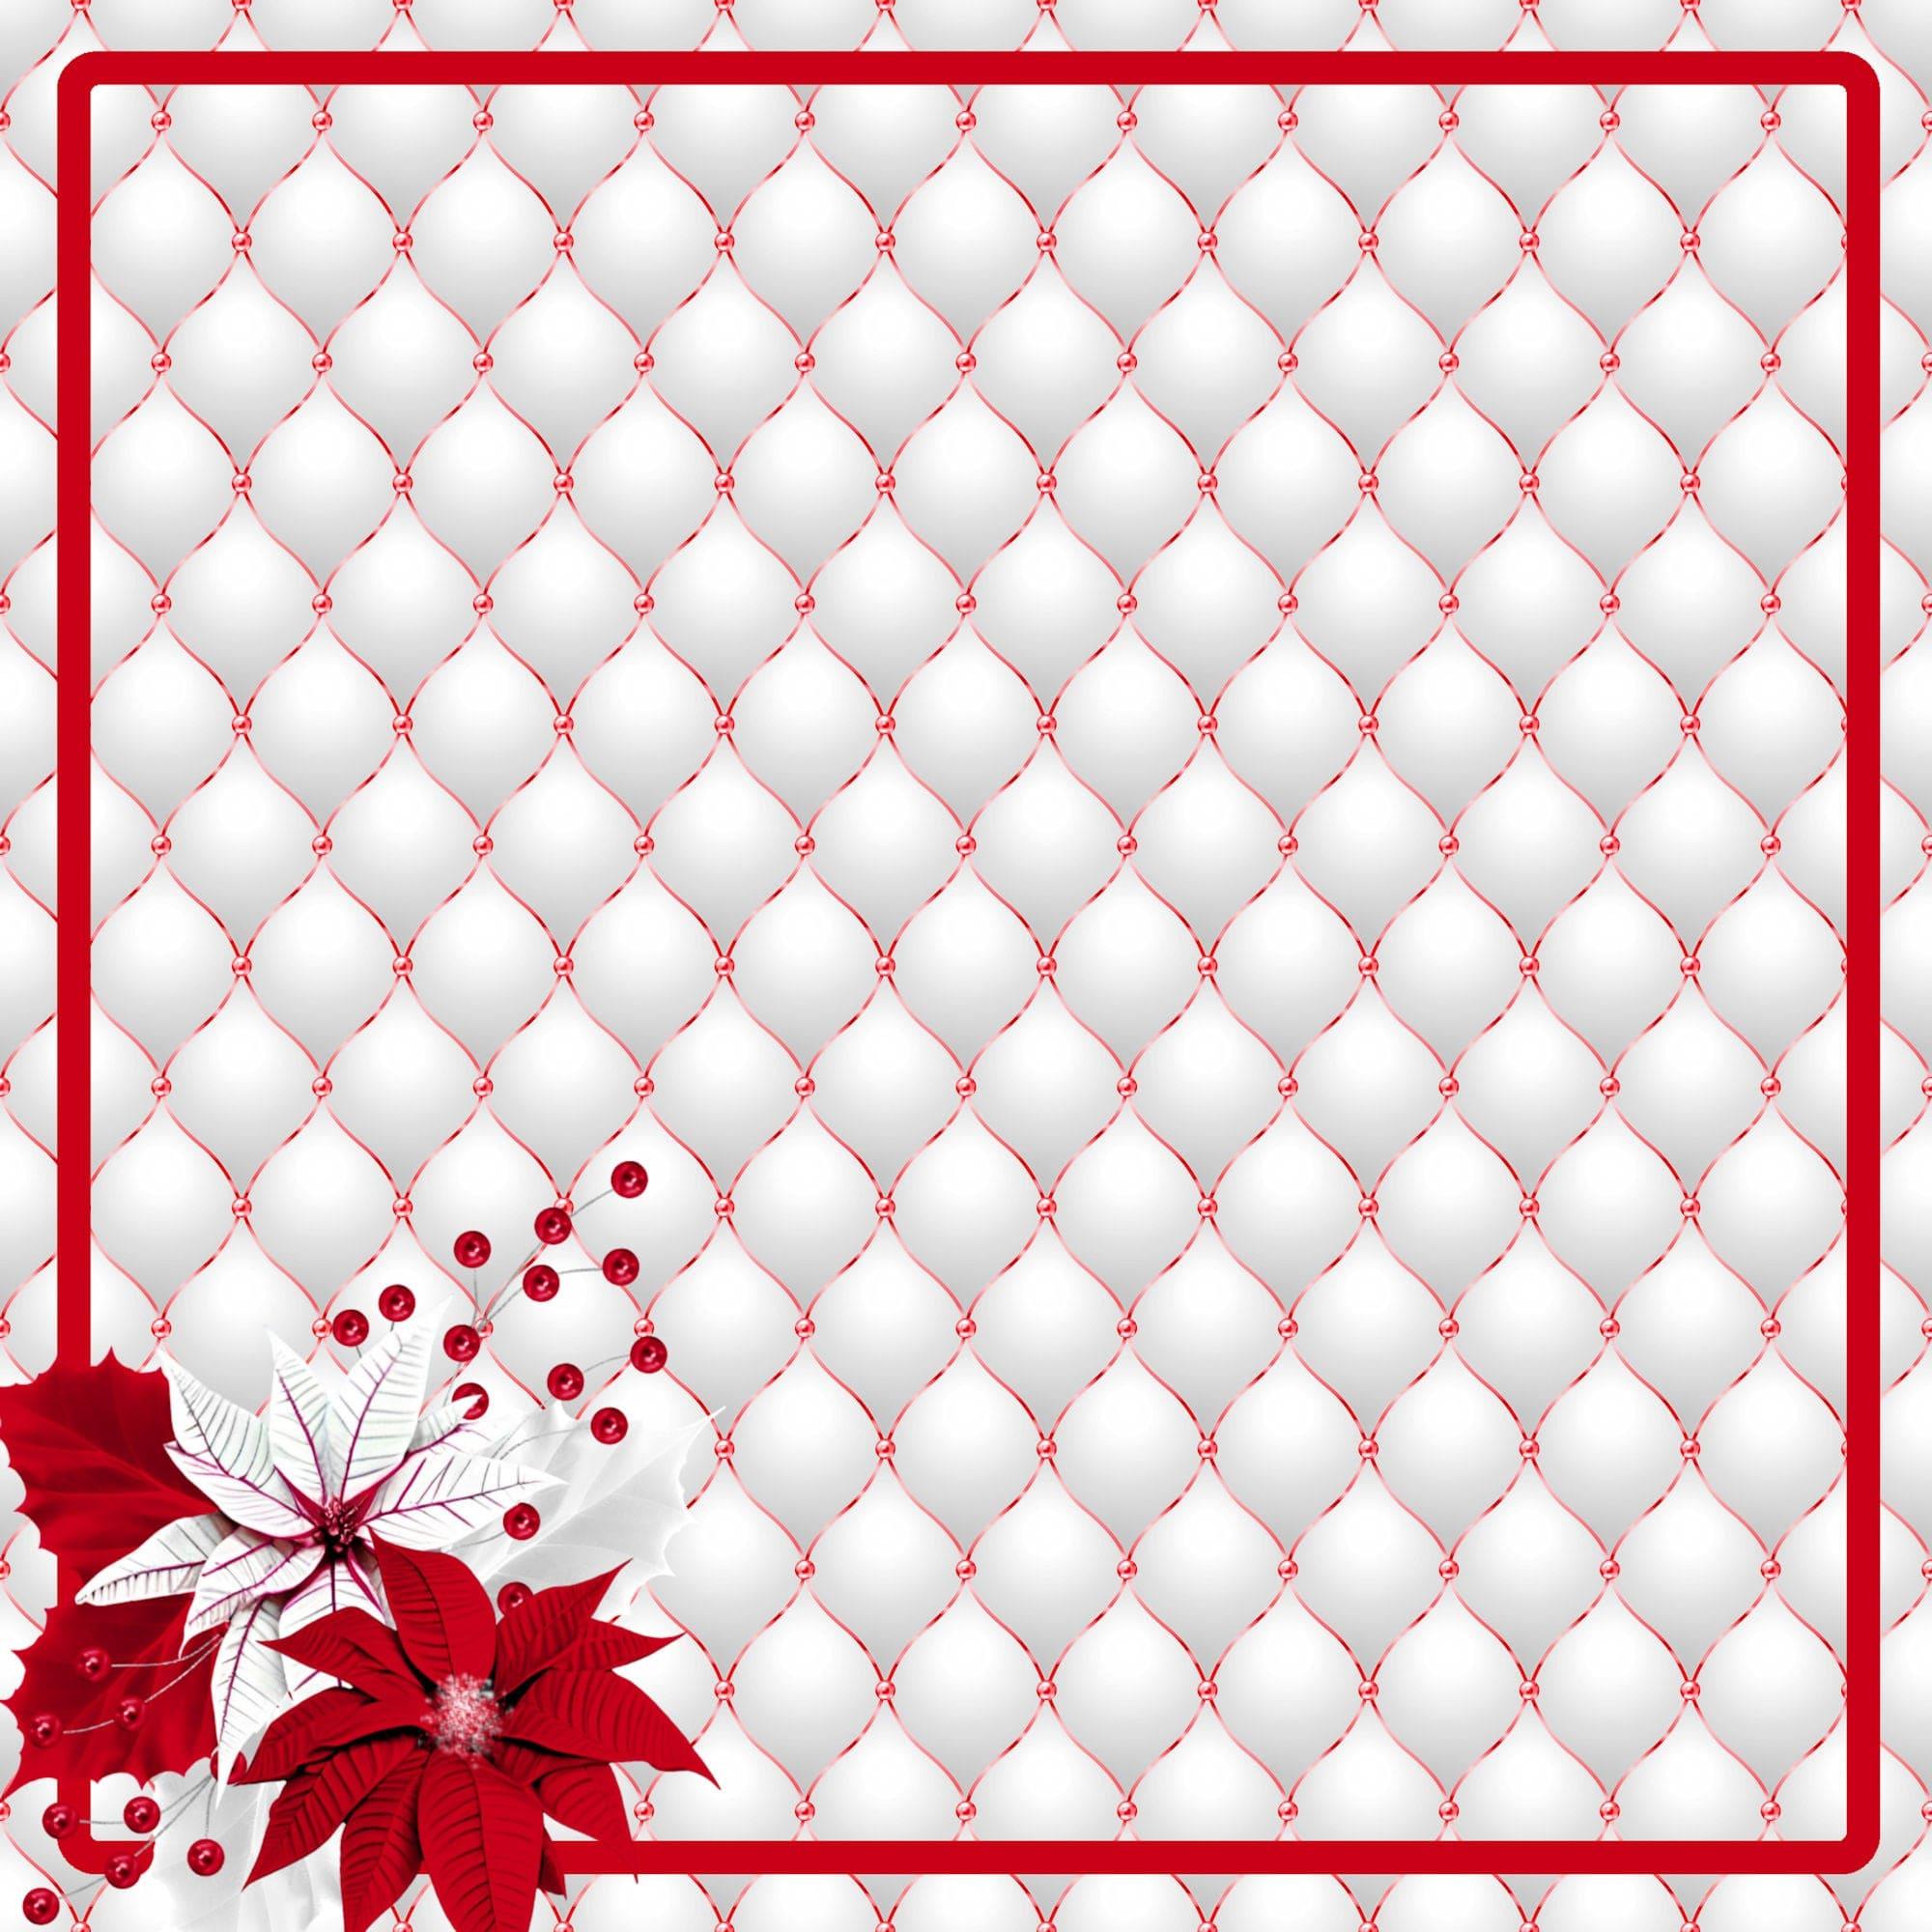 Peppermint Christmas Collection Poinsettias 12 x 12 Double-Sided Scrapbook Paper by SSC Designs - Scrapbook Supply Companies